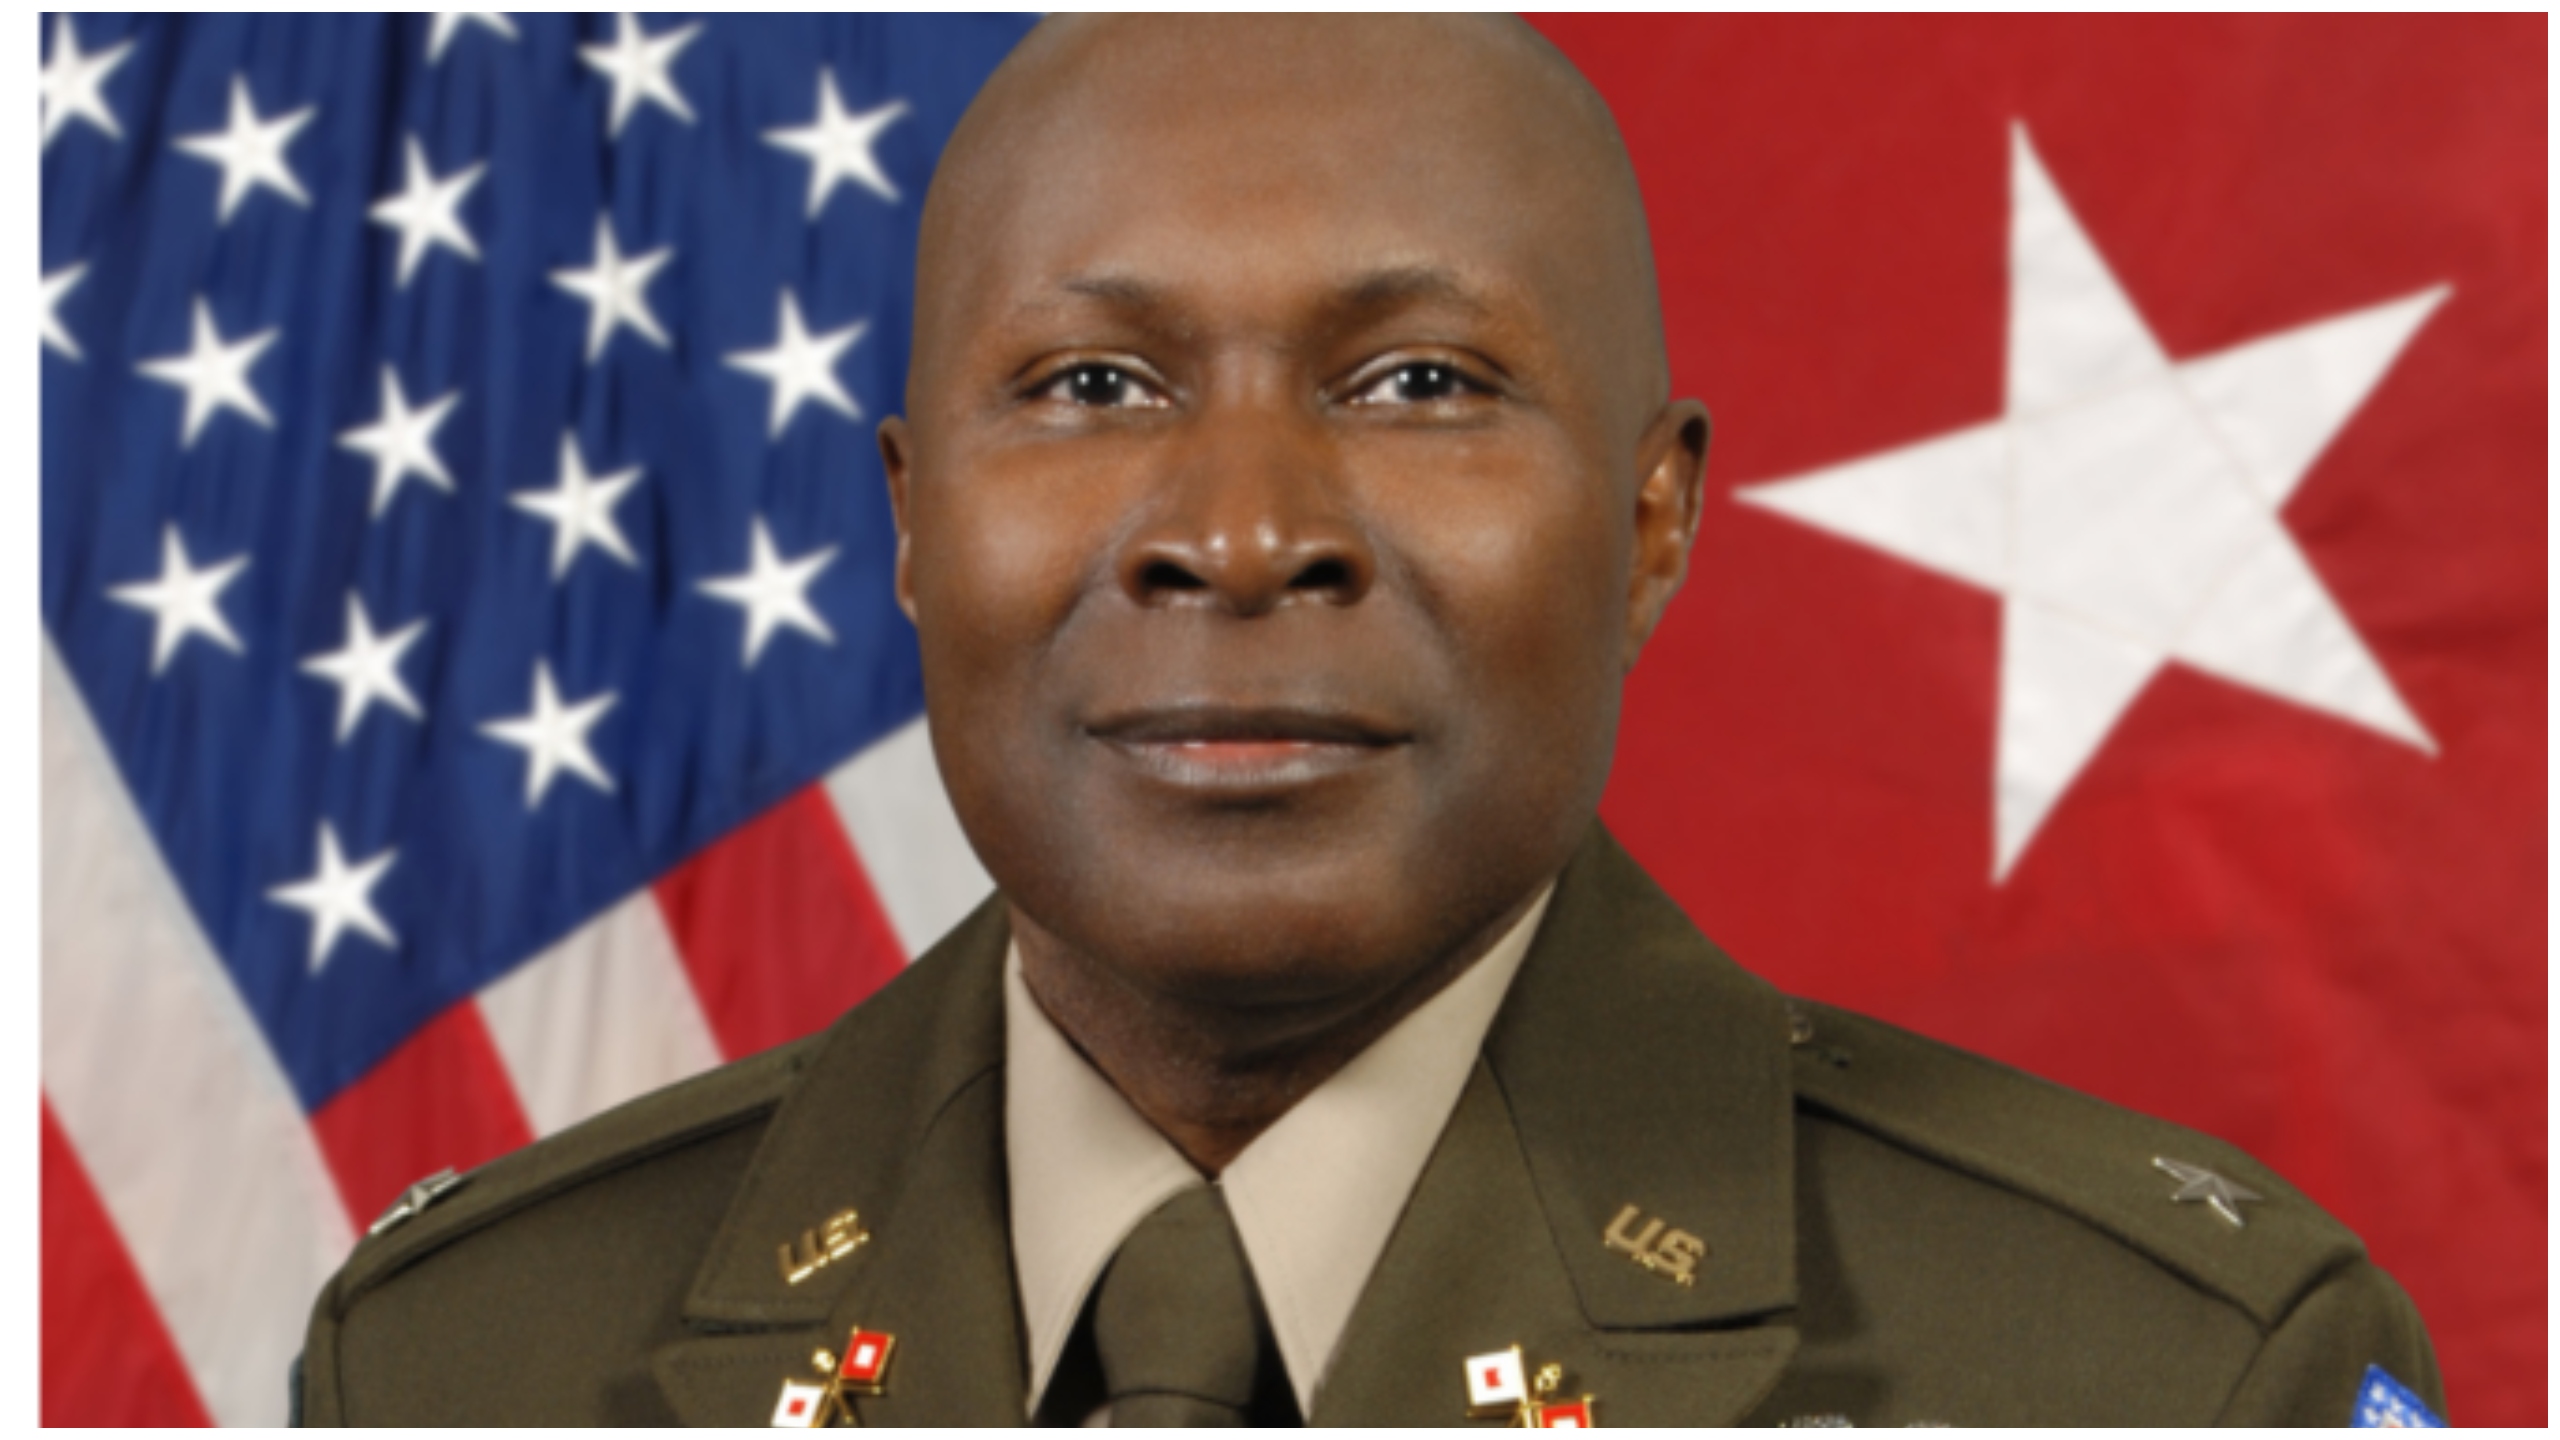 Colonel Leland Tony Shepard From Guyana, South America Is The First Black Officer To Command The Arkansas Army National Guard